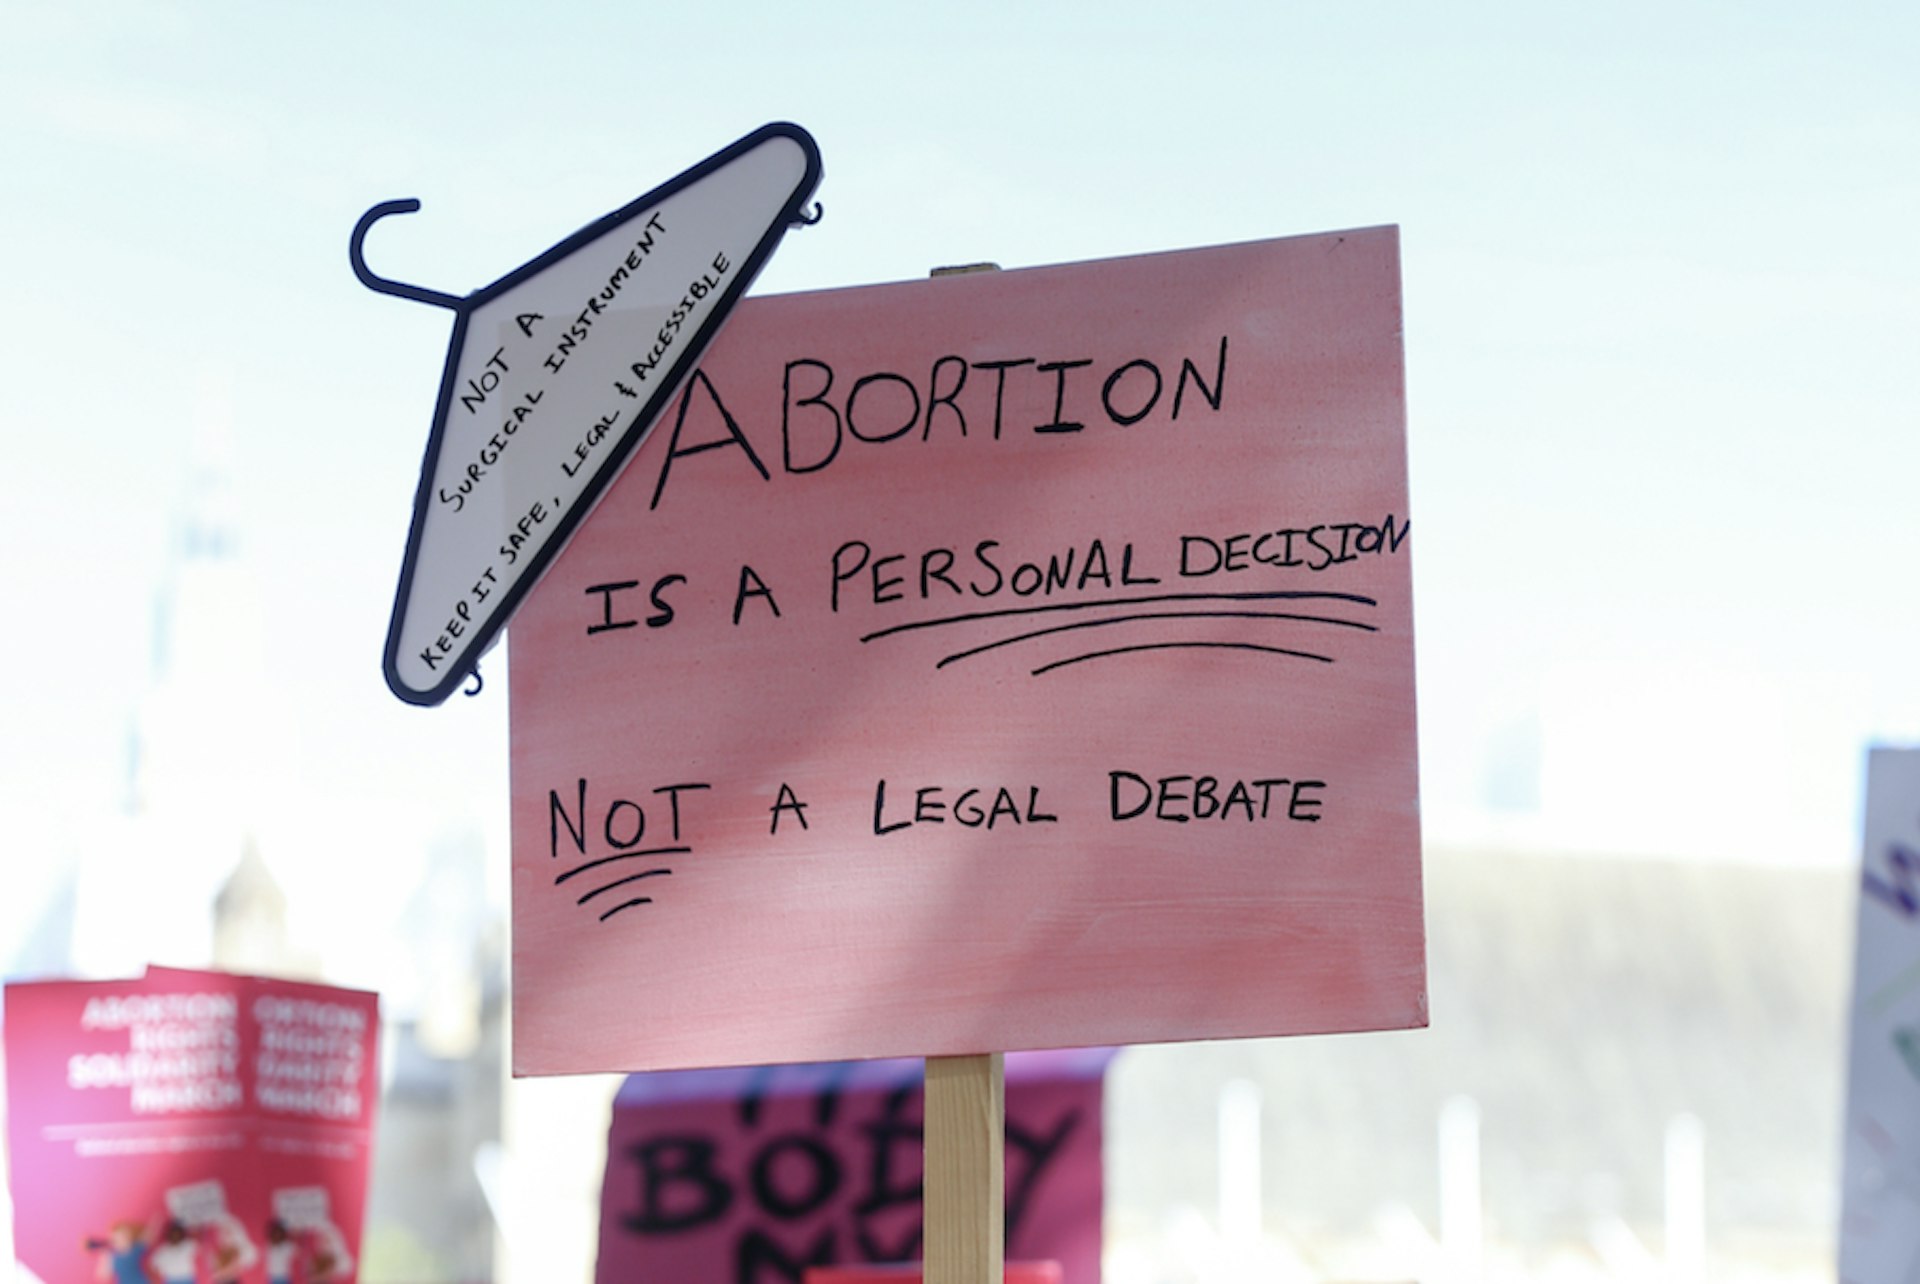 In Northern Ireland, pro-choice campaigners are celebrating